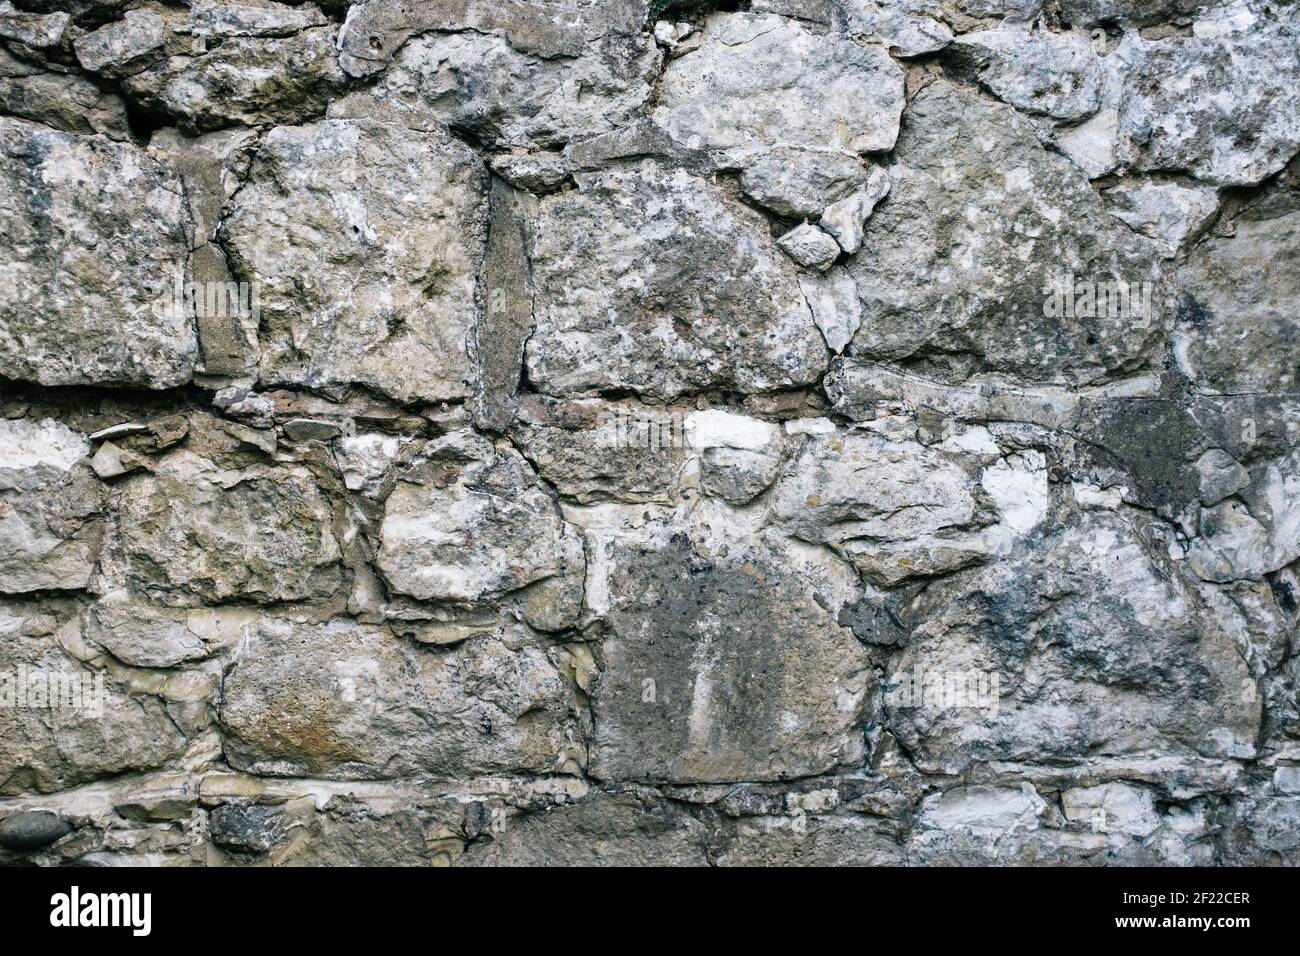 Grey stone granite wall with uneven textures Stock Photo